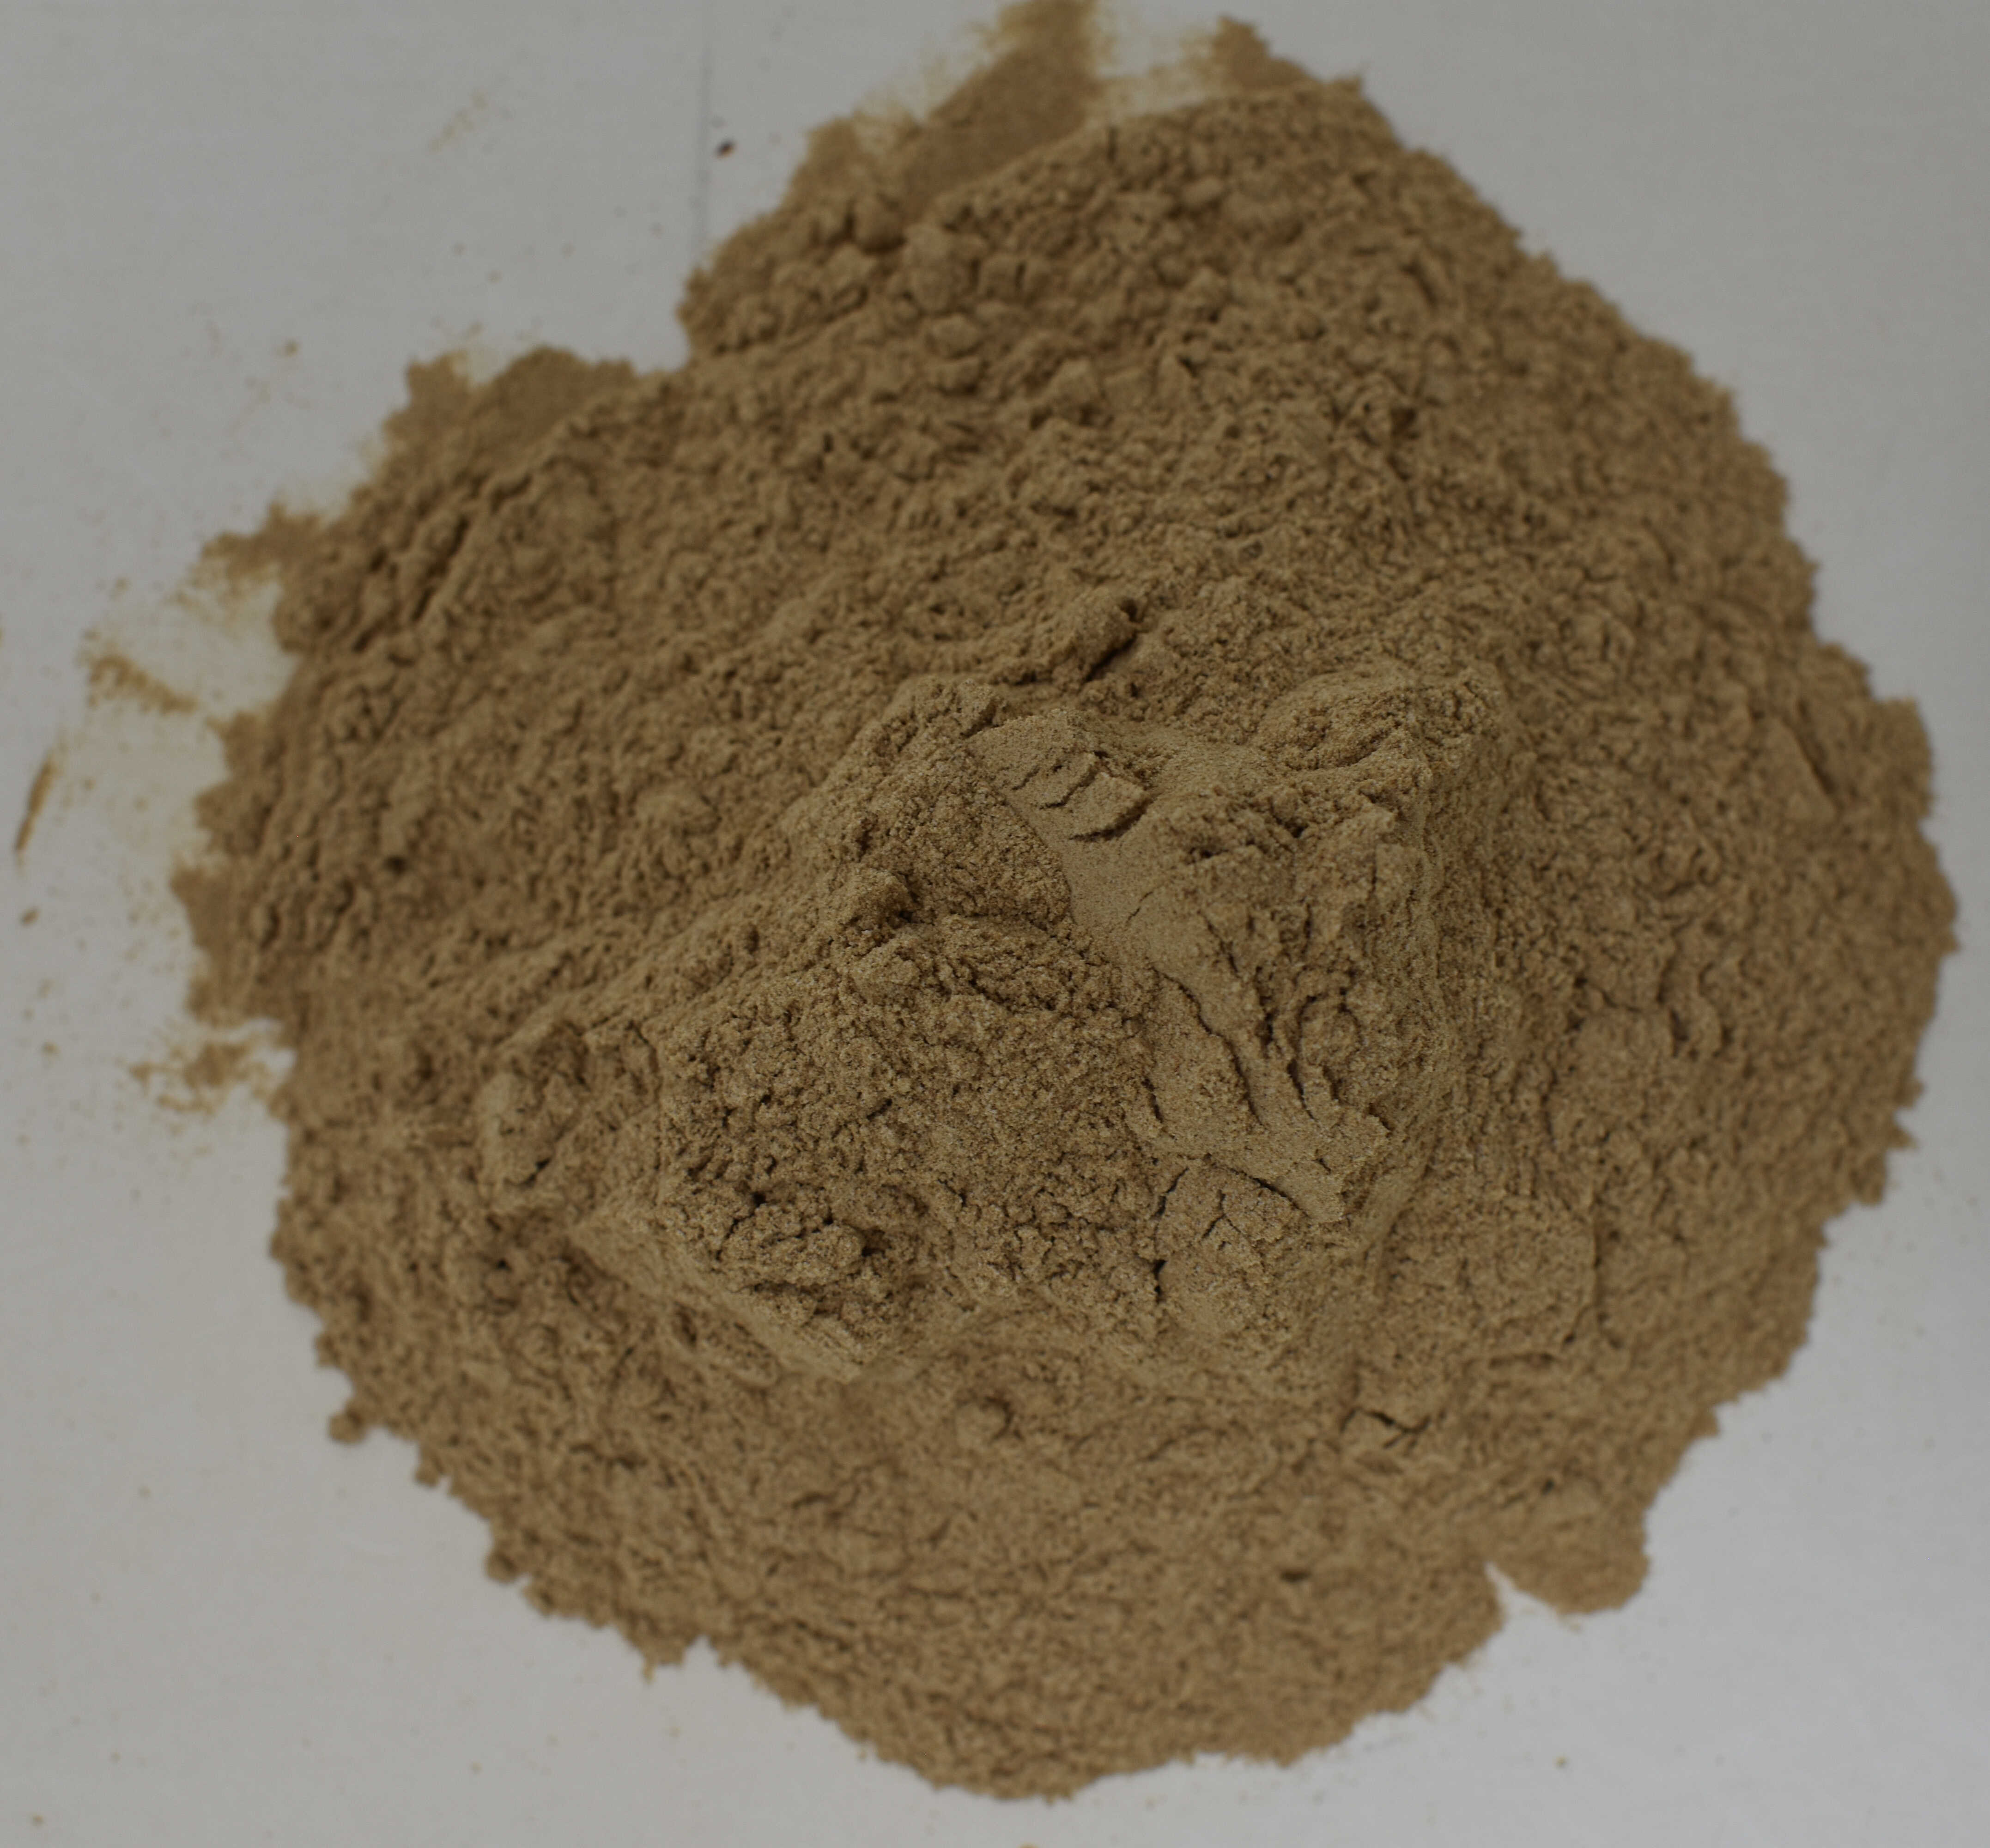 American Ginseng 4:1 Extract - Top Photo